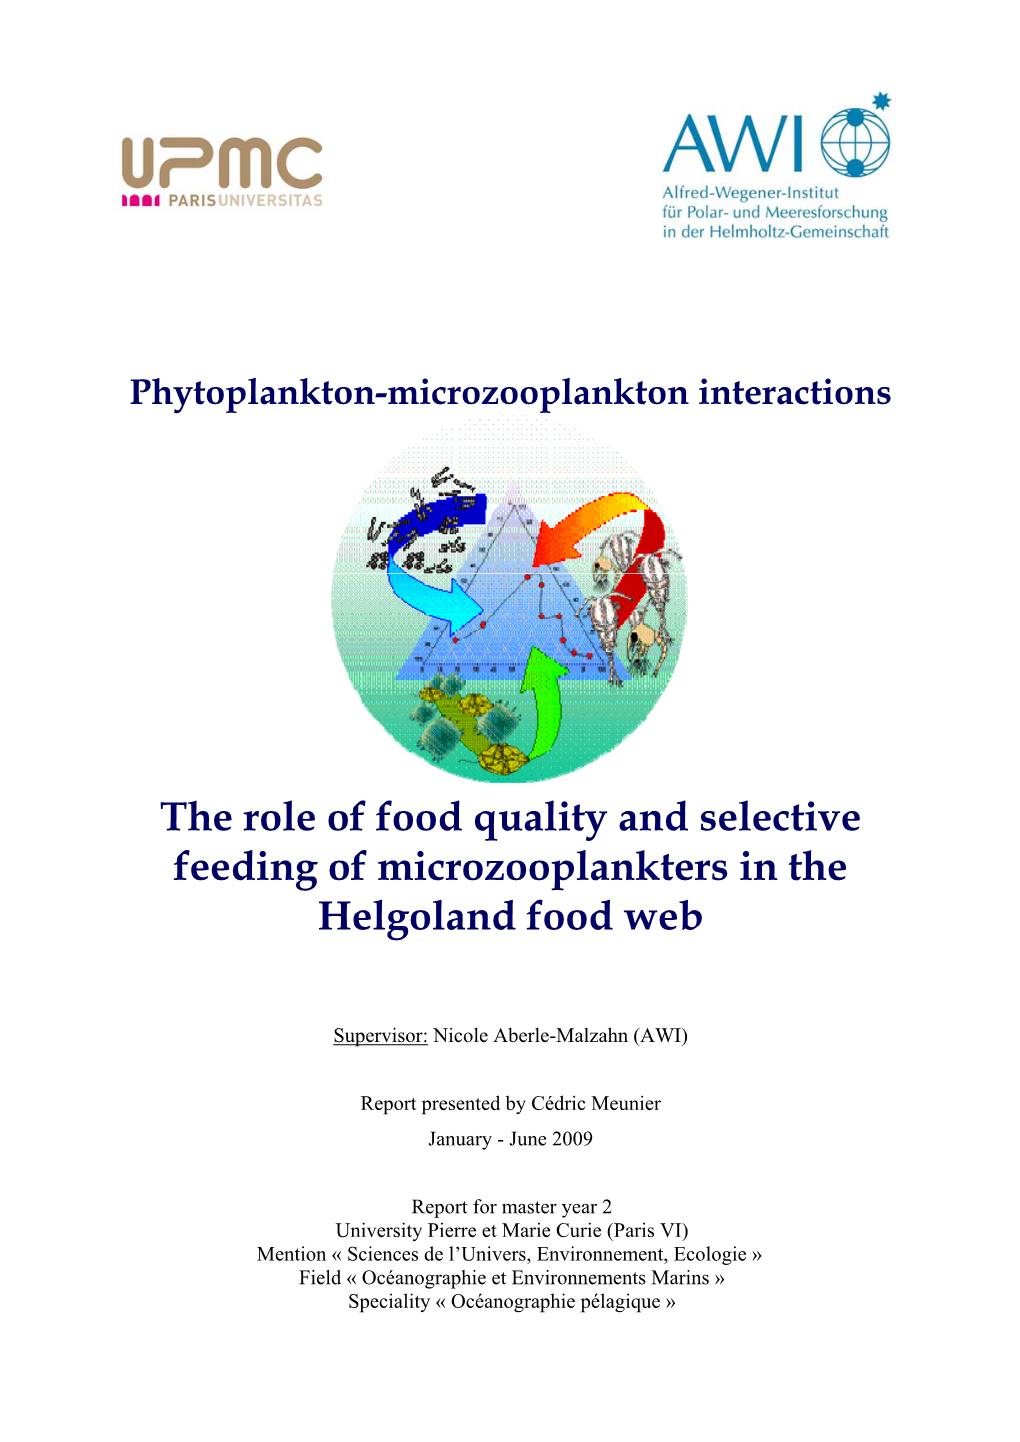 The Role of Food Quality and Selective Feeding of Microzooplankters in the Helgoland Food Web